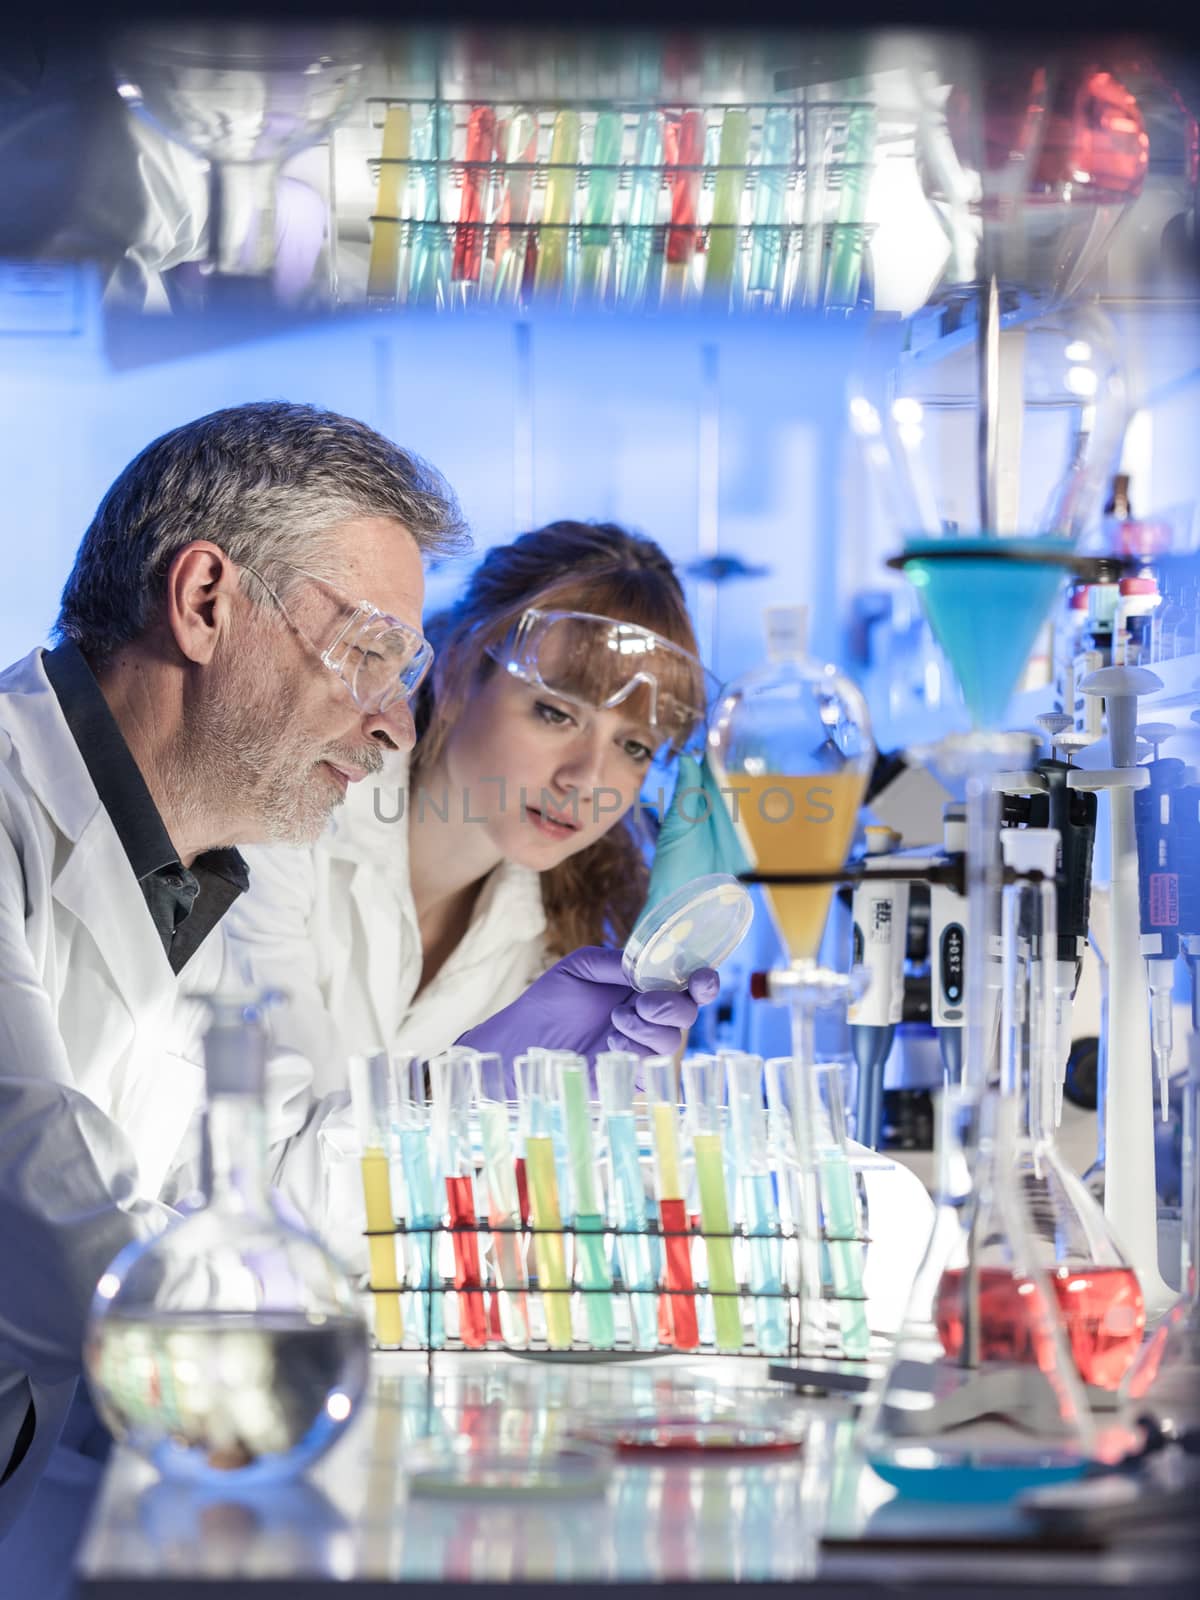 Scientists researching in scientific laboratory. Young female scientist and her senior male supervisor looking at the cell colony grown in the petri dish in the life science research laboratory.